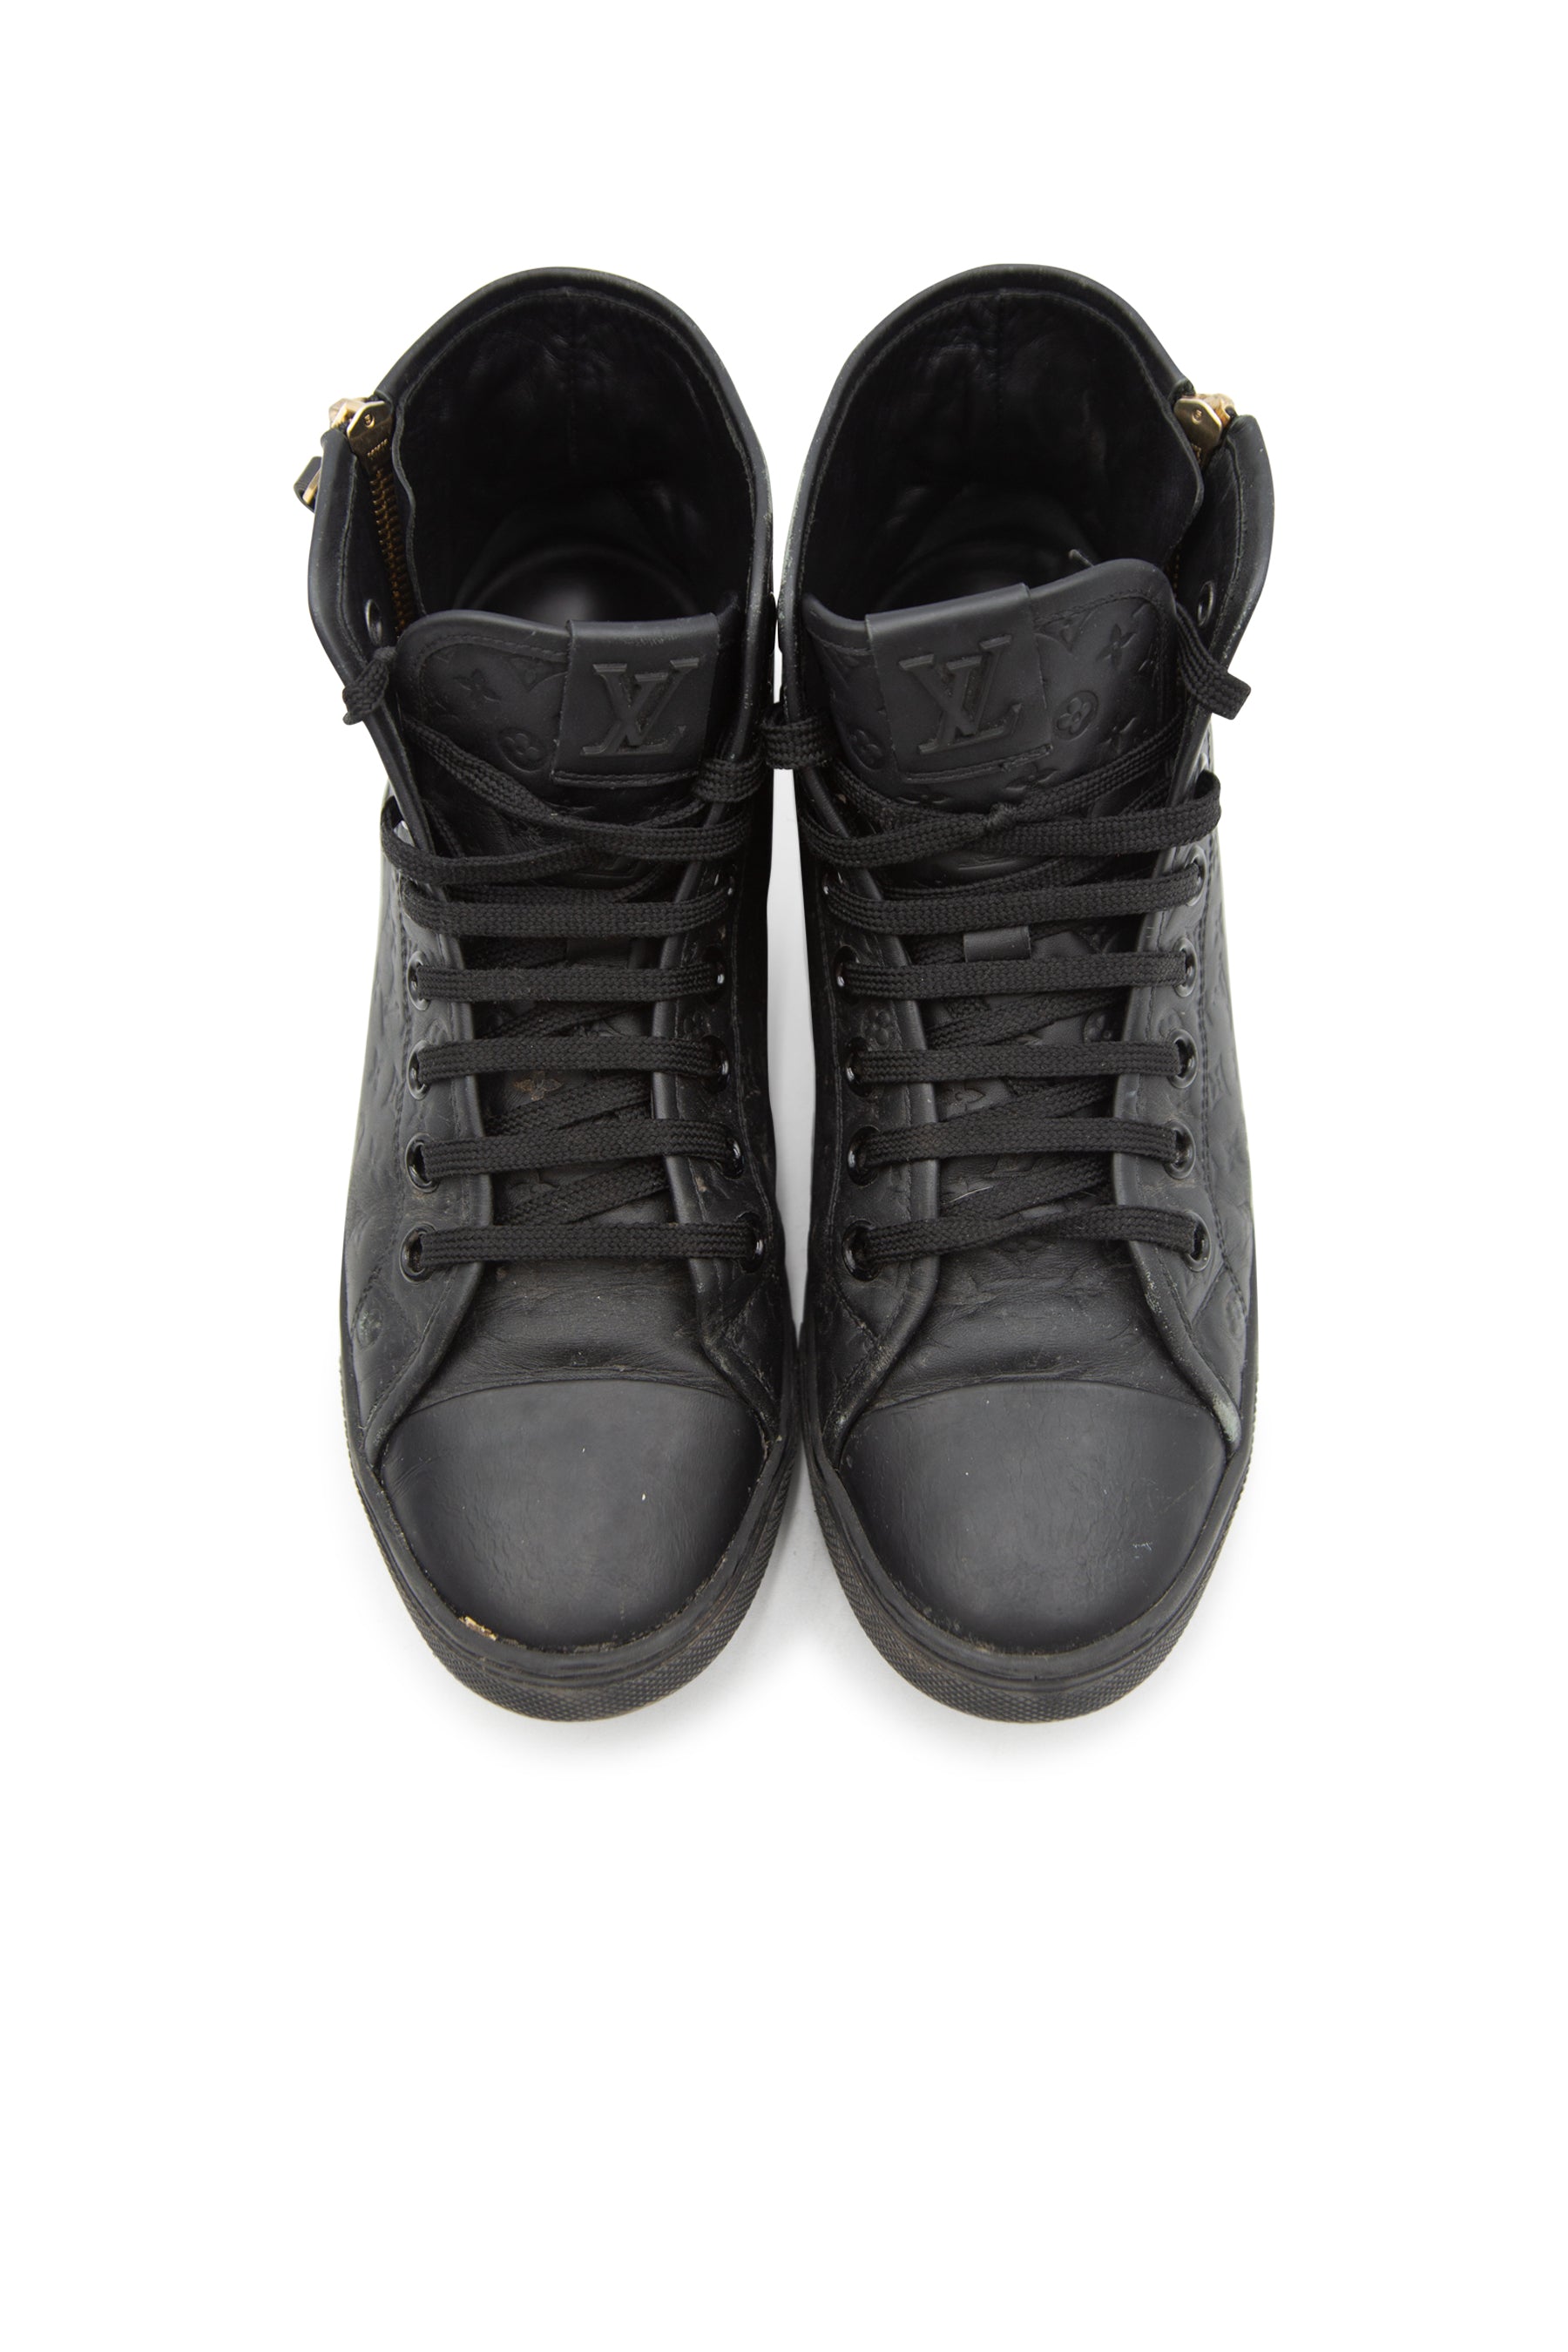 Louis Vuitton Trainer Sneaker Uniform Black Suede Made In Italy